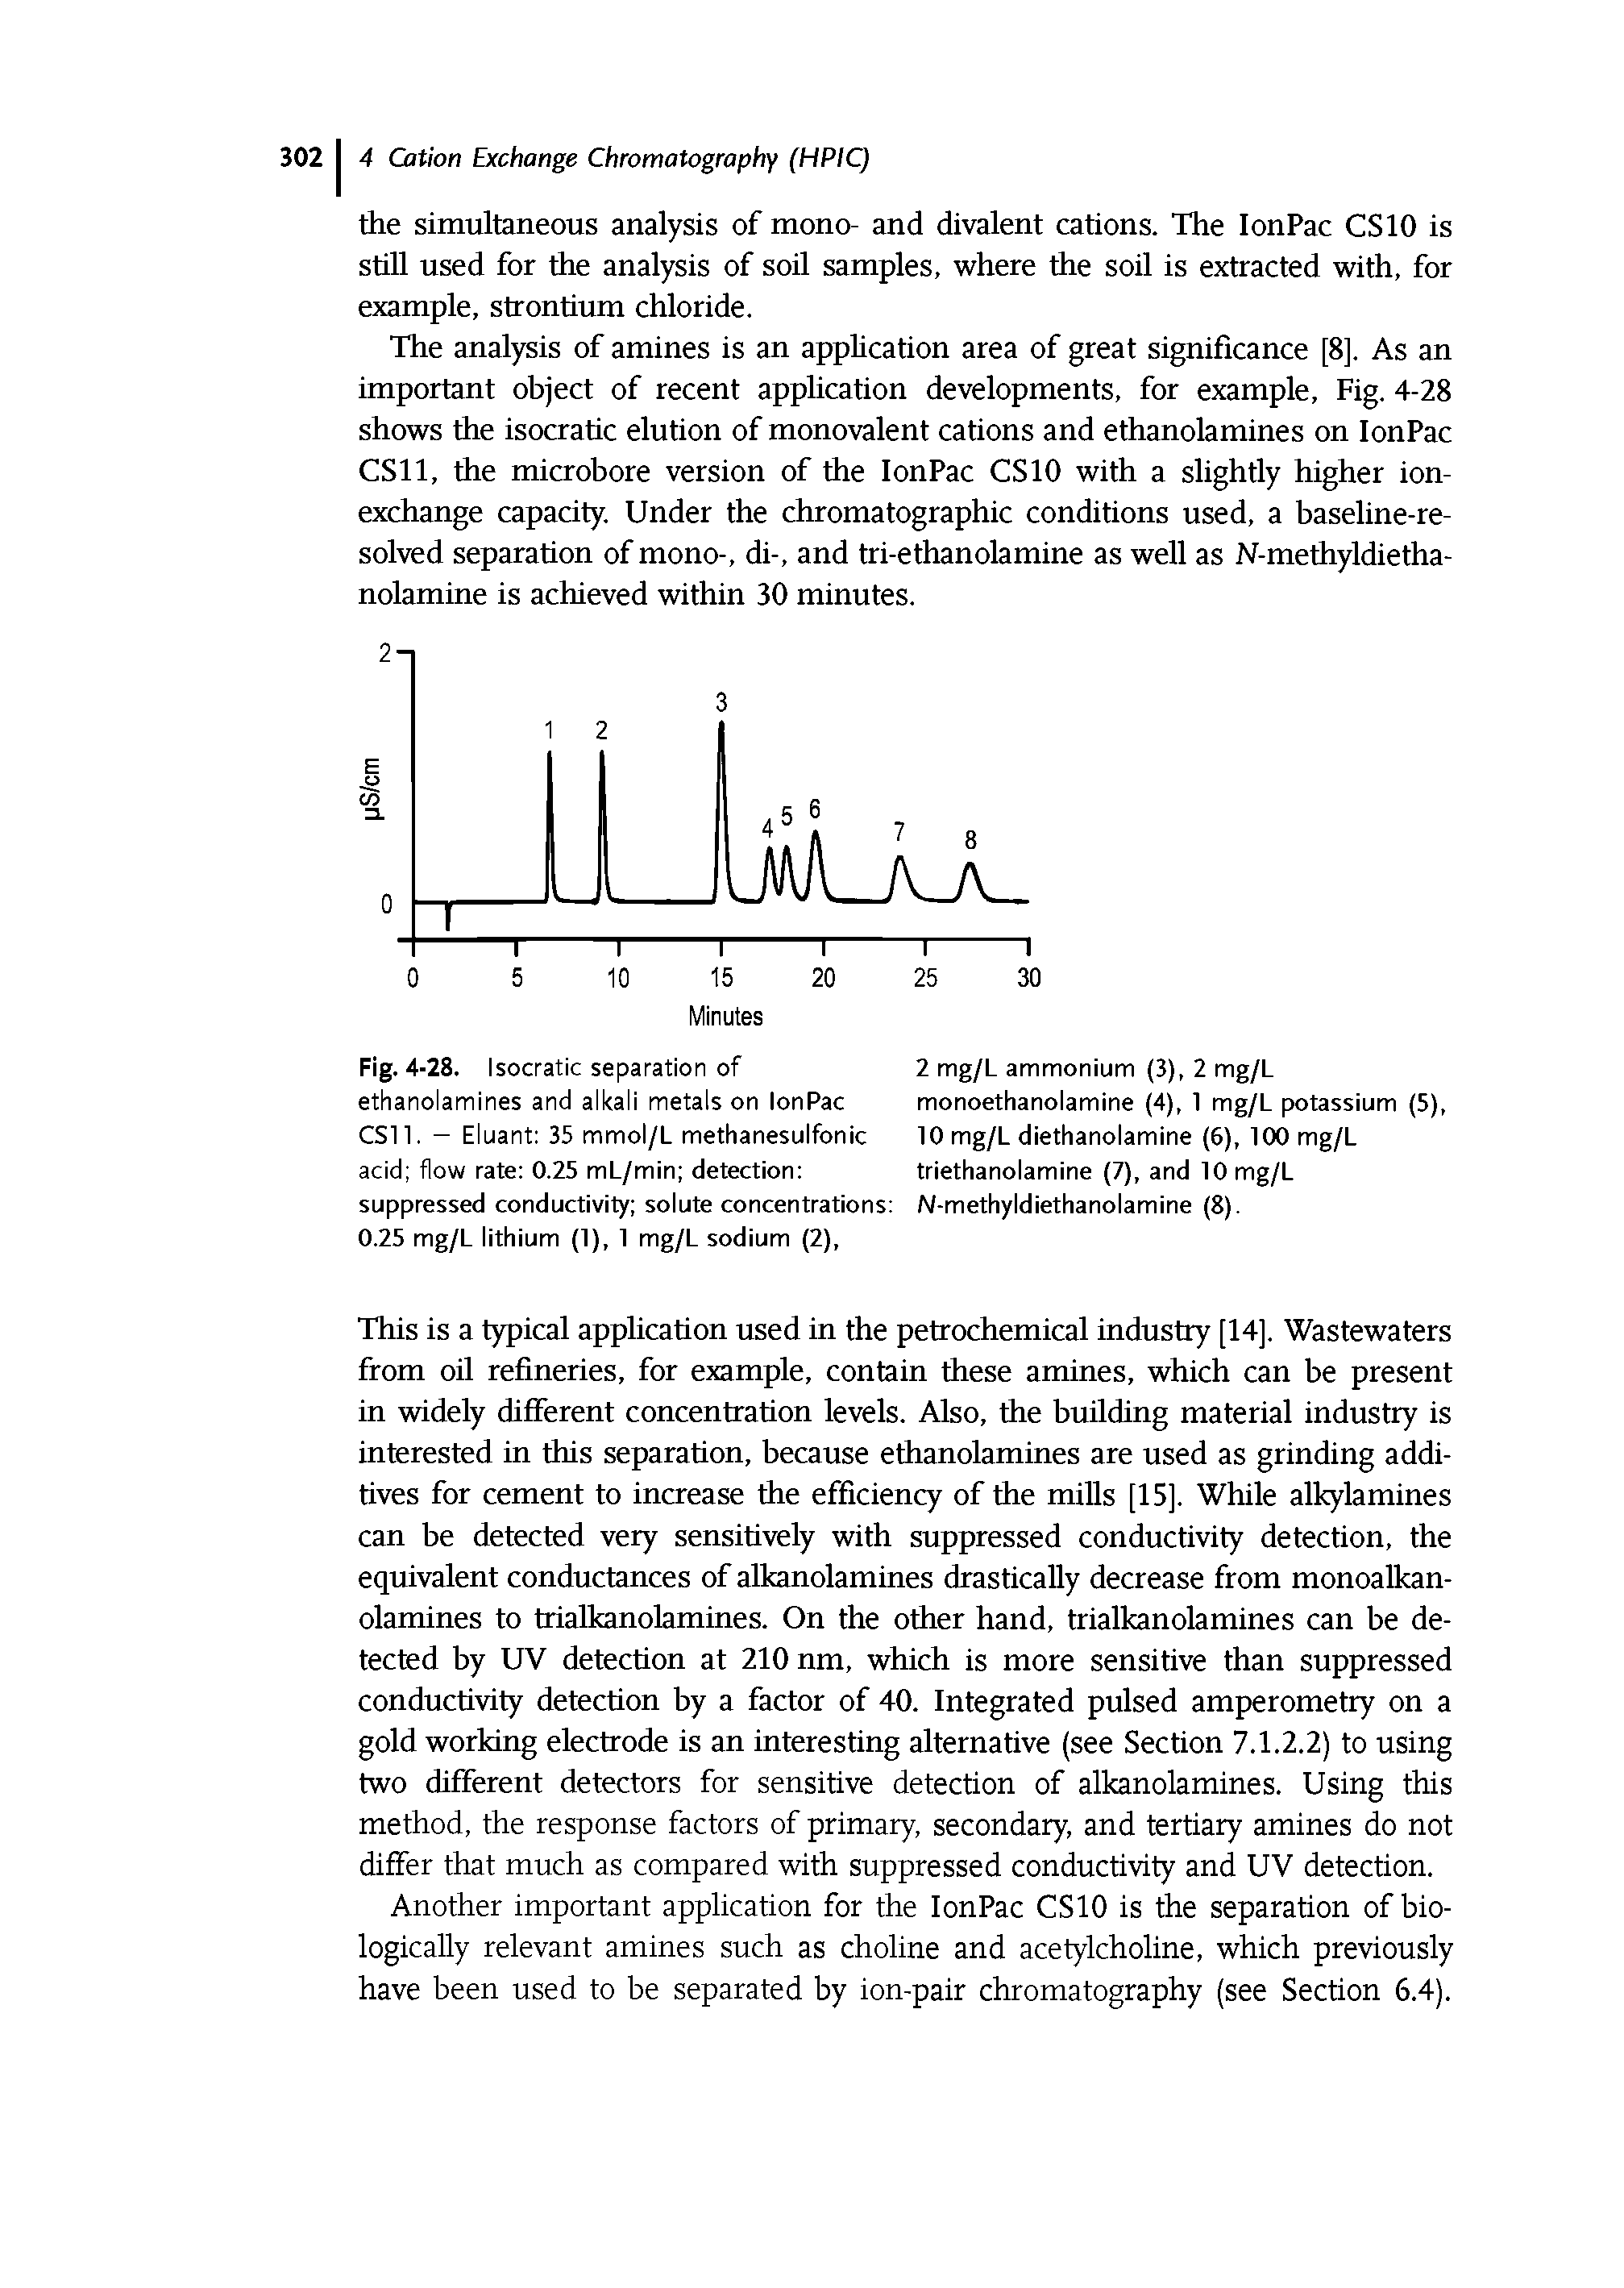 Fig. 4-28. Isocratic separation of ethanolamines and alkali metals on lonPac CSll. - Eluant 35 mmol/L methanesulfonic acid flow rate 0.25 mL/min detection suppressed conductivity solute concentrations 0.25 mg/L lithium (1). 1 mg/L sodium (2).